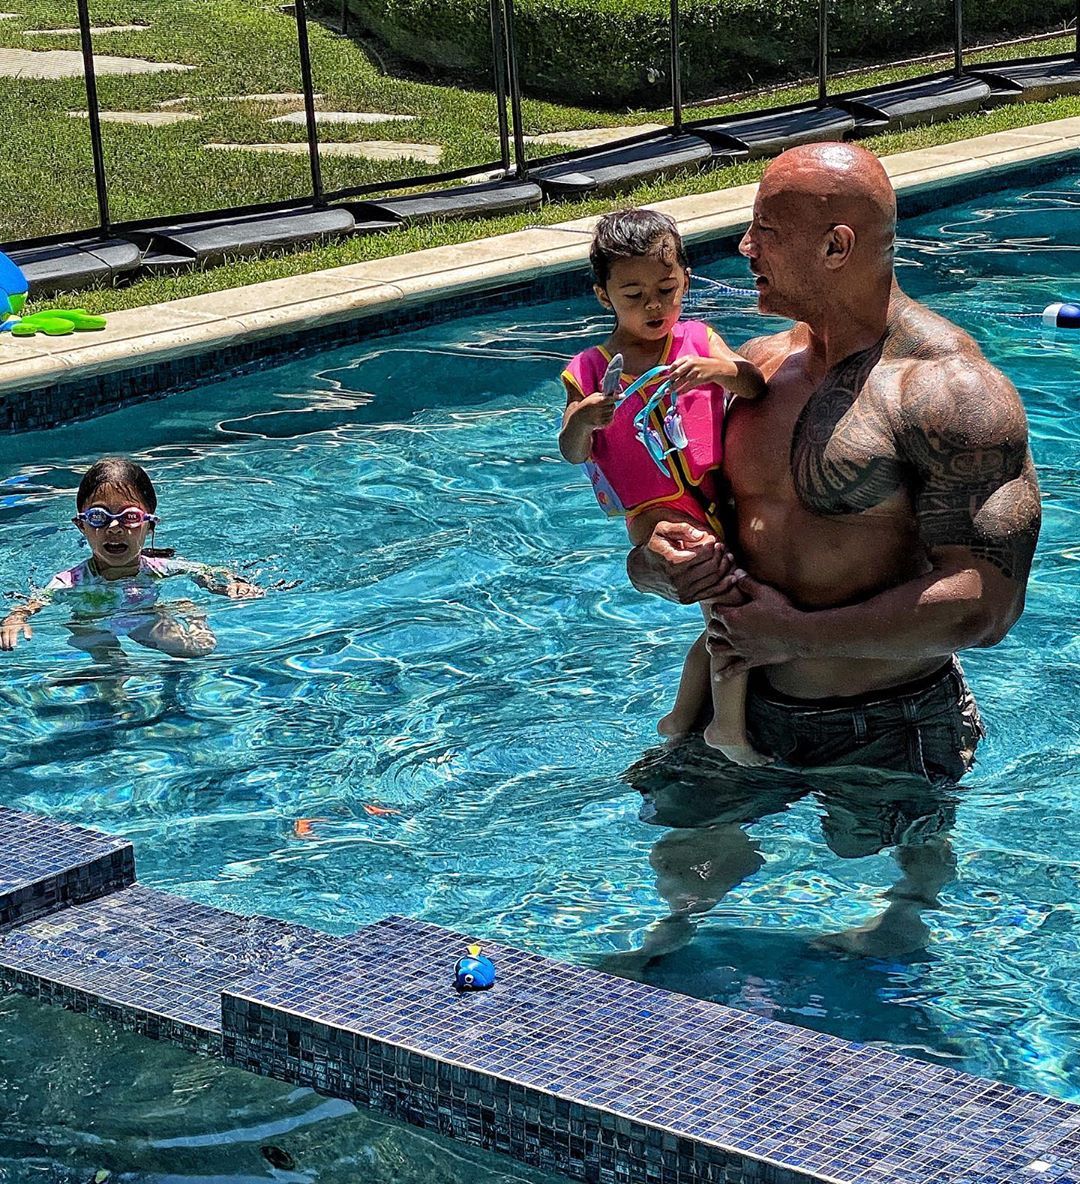 Dwayne Johnson Shared a Cute Poolside Photo With His Daughters